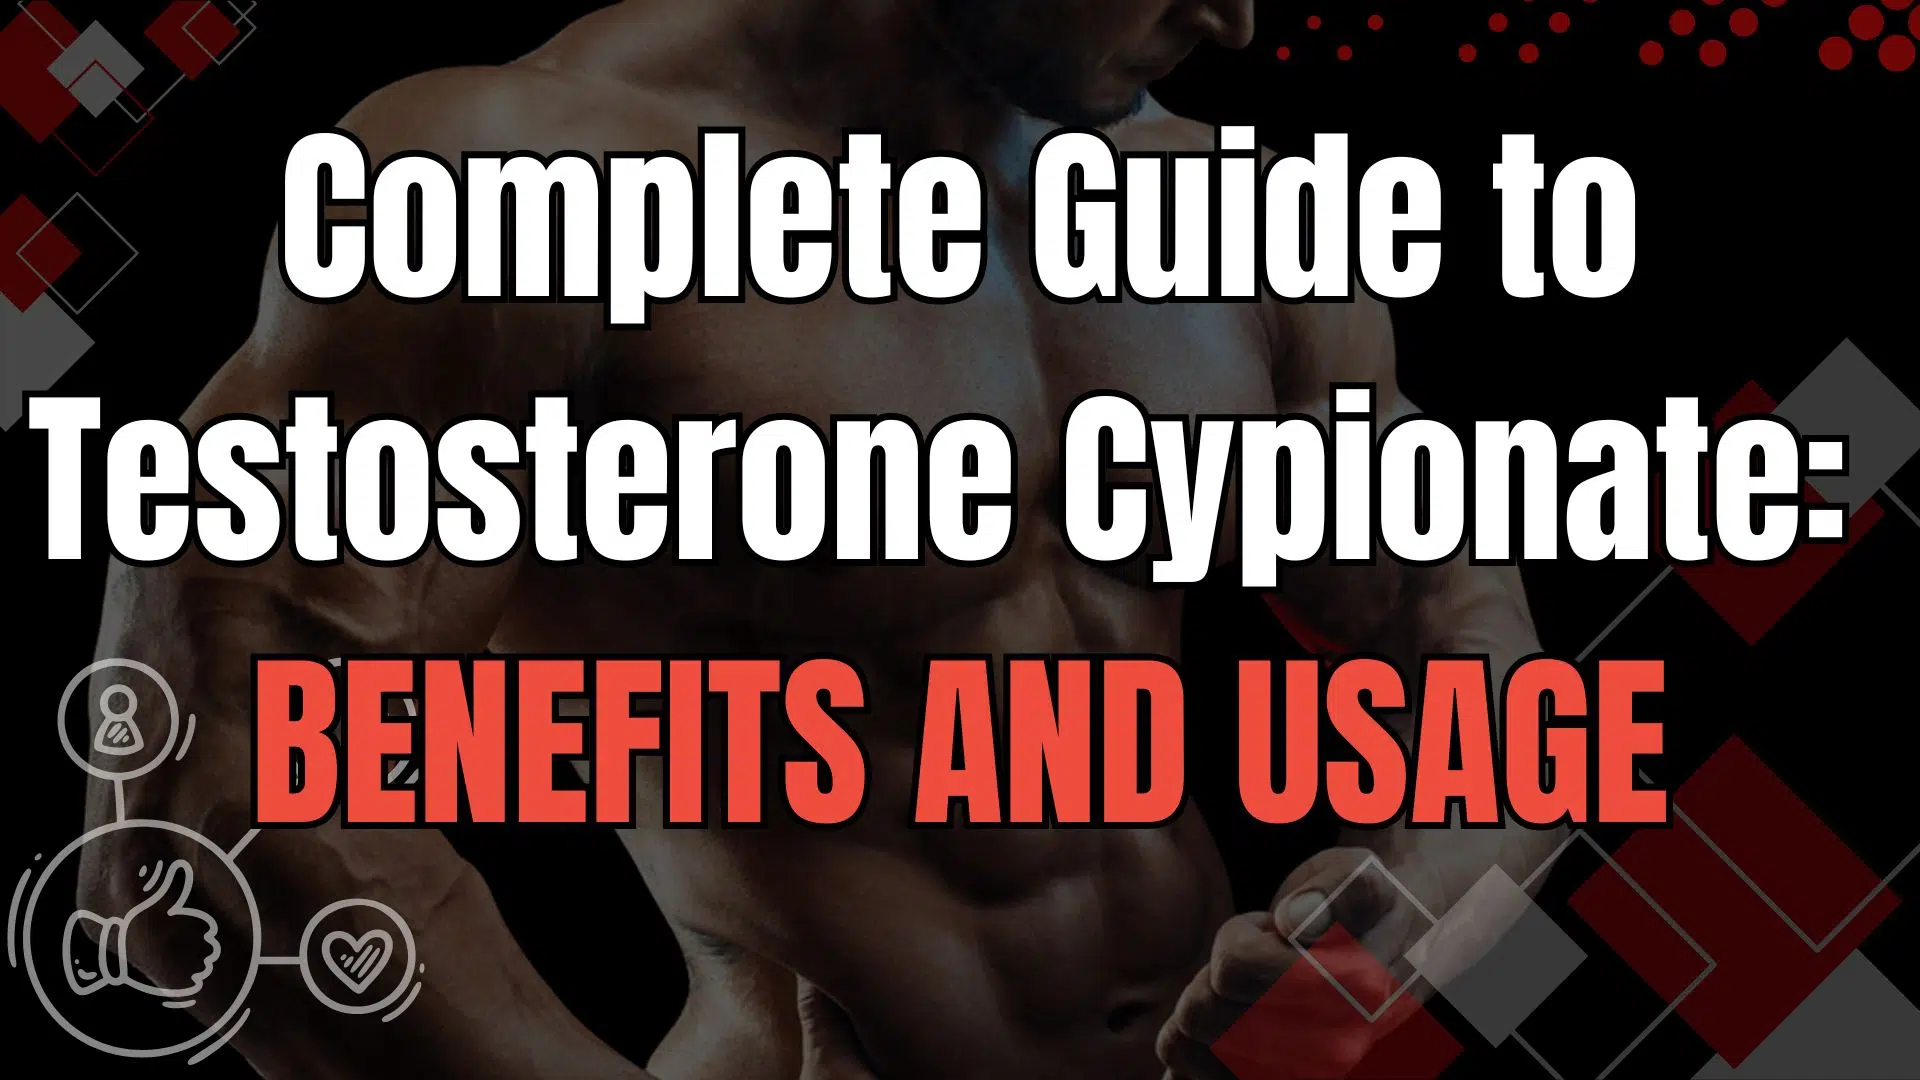 Complete Guide to Testosterone Cypionate: Benefits and Usage